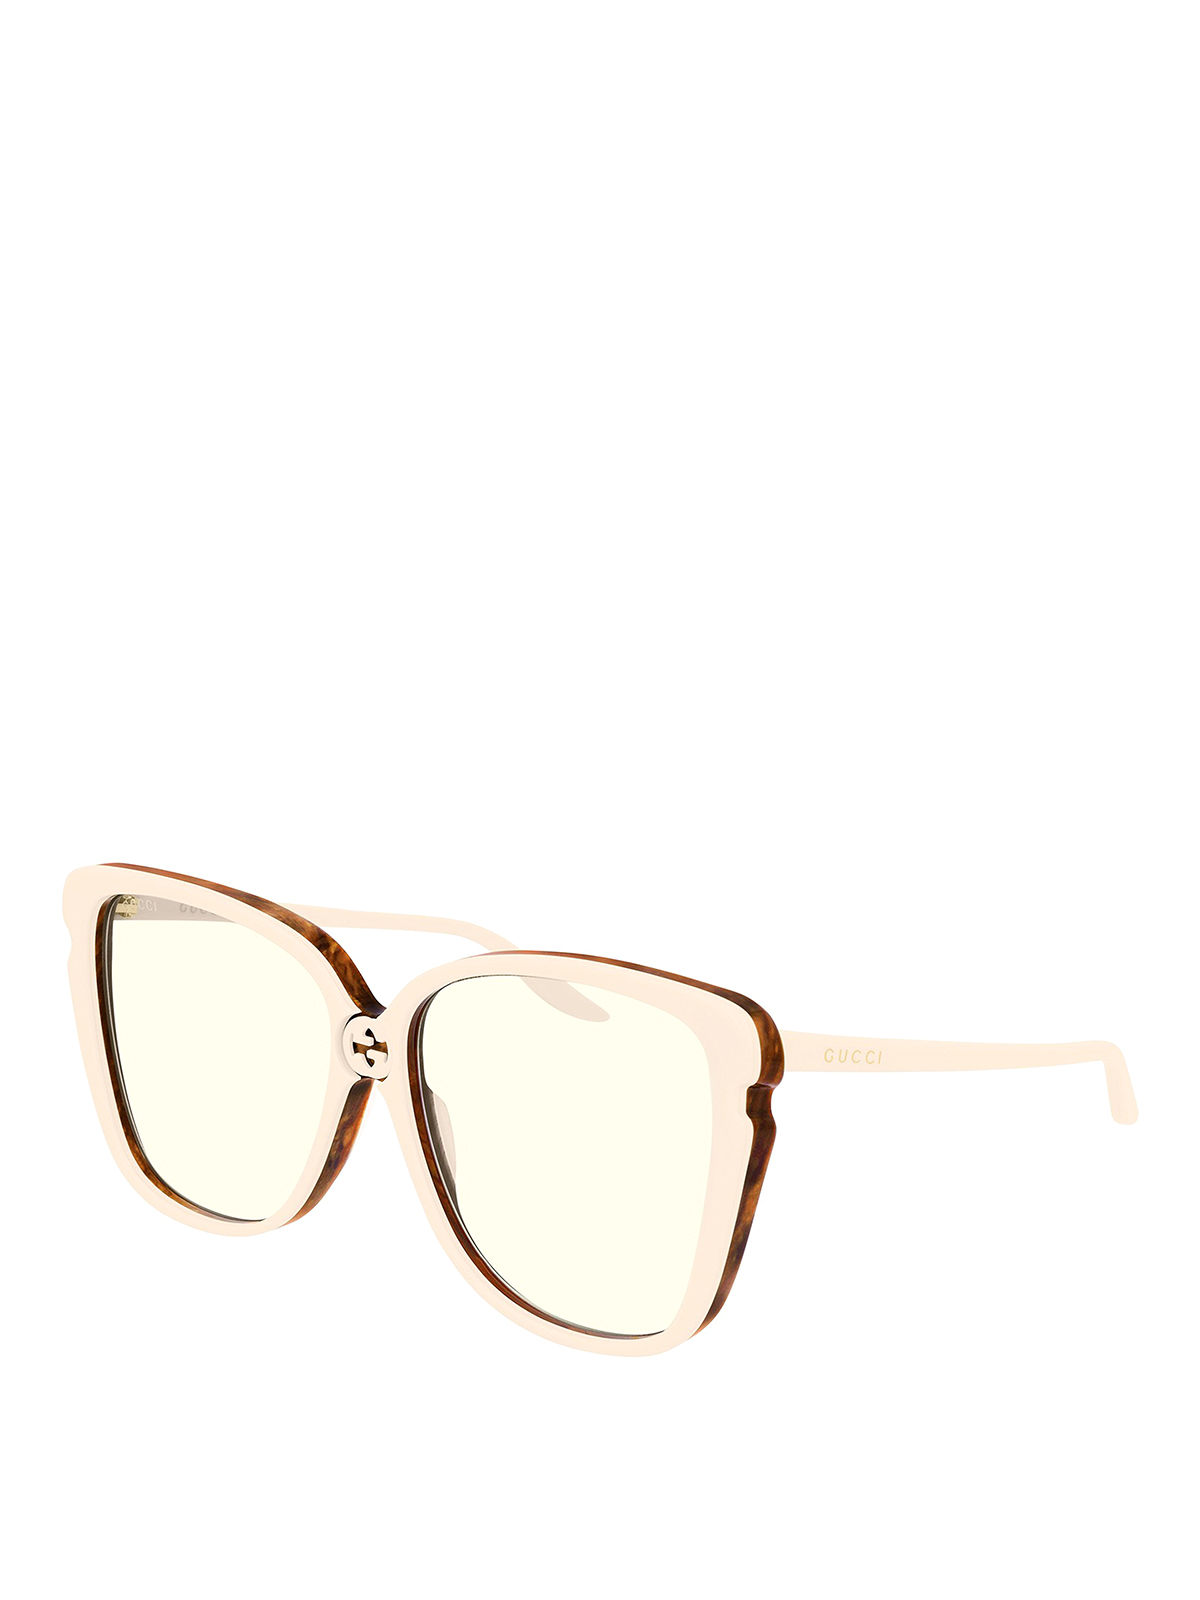 Gucci Cat-eye Glasses In Nude And Neutrals